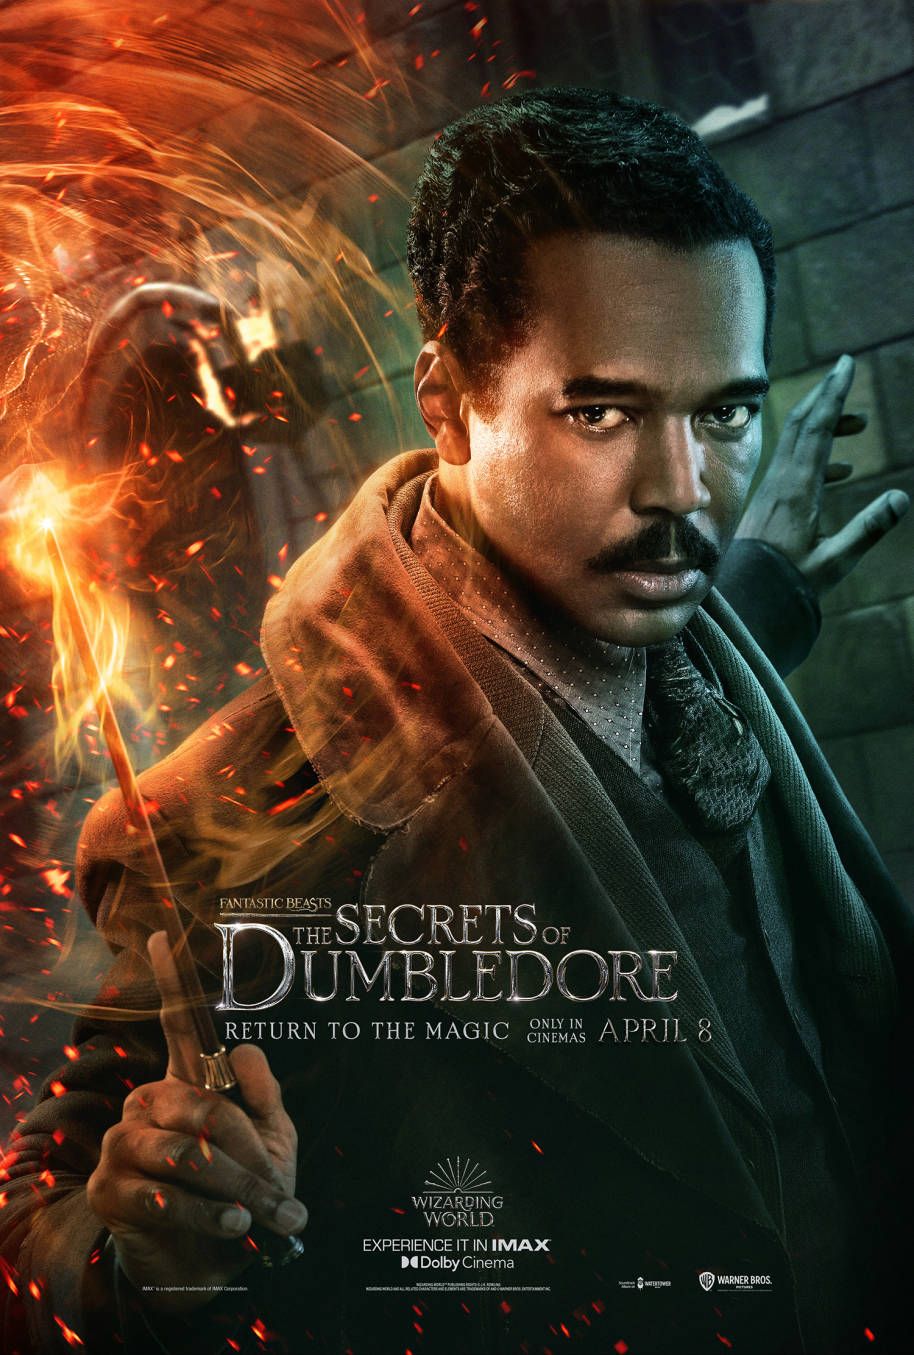 Yusuf Kama played by William Nadylam in the Fantastic Beasts: Secrets of Dumbledore poster.